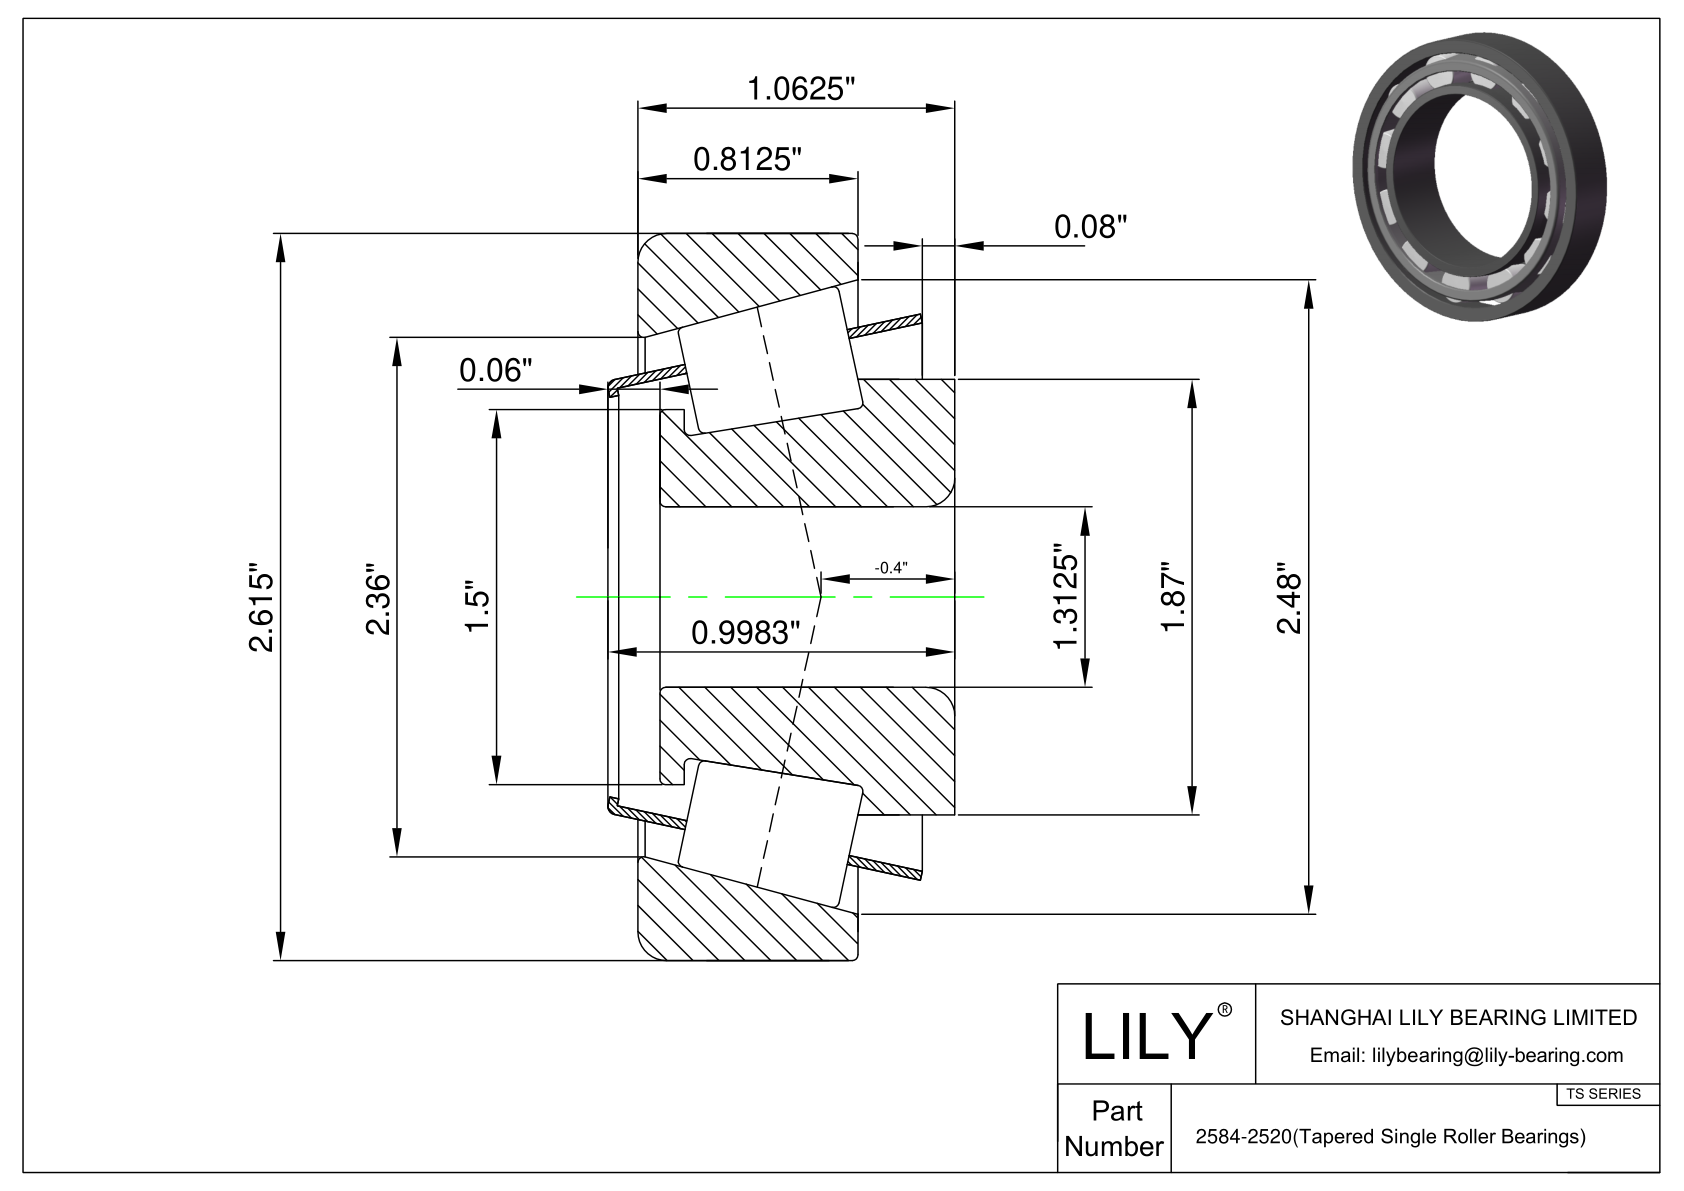 2584-2530 TS (Tapered Single Roller Bearings) (Imperial) cad drawing